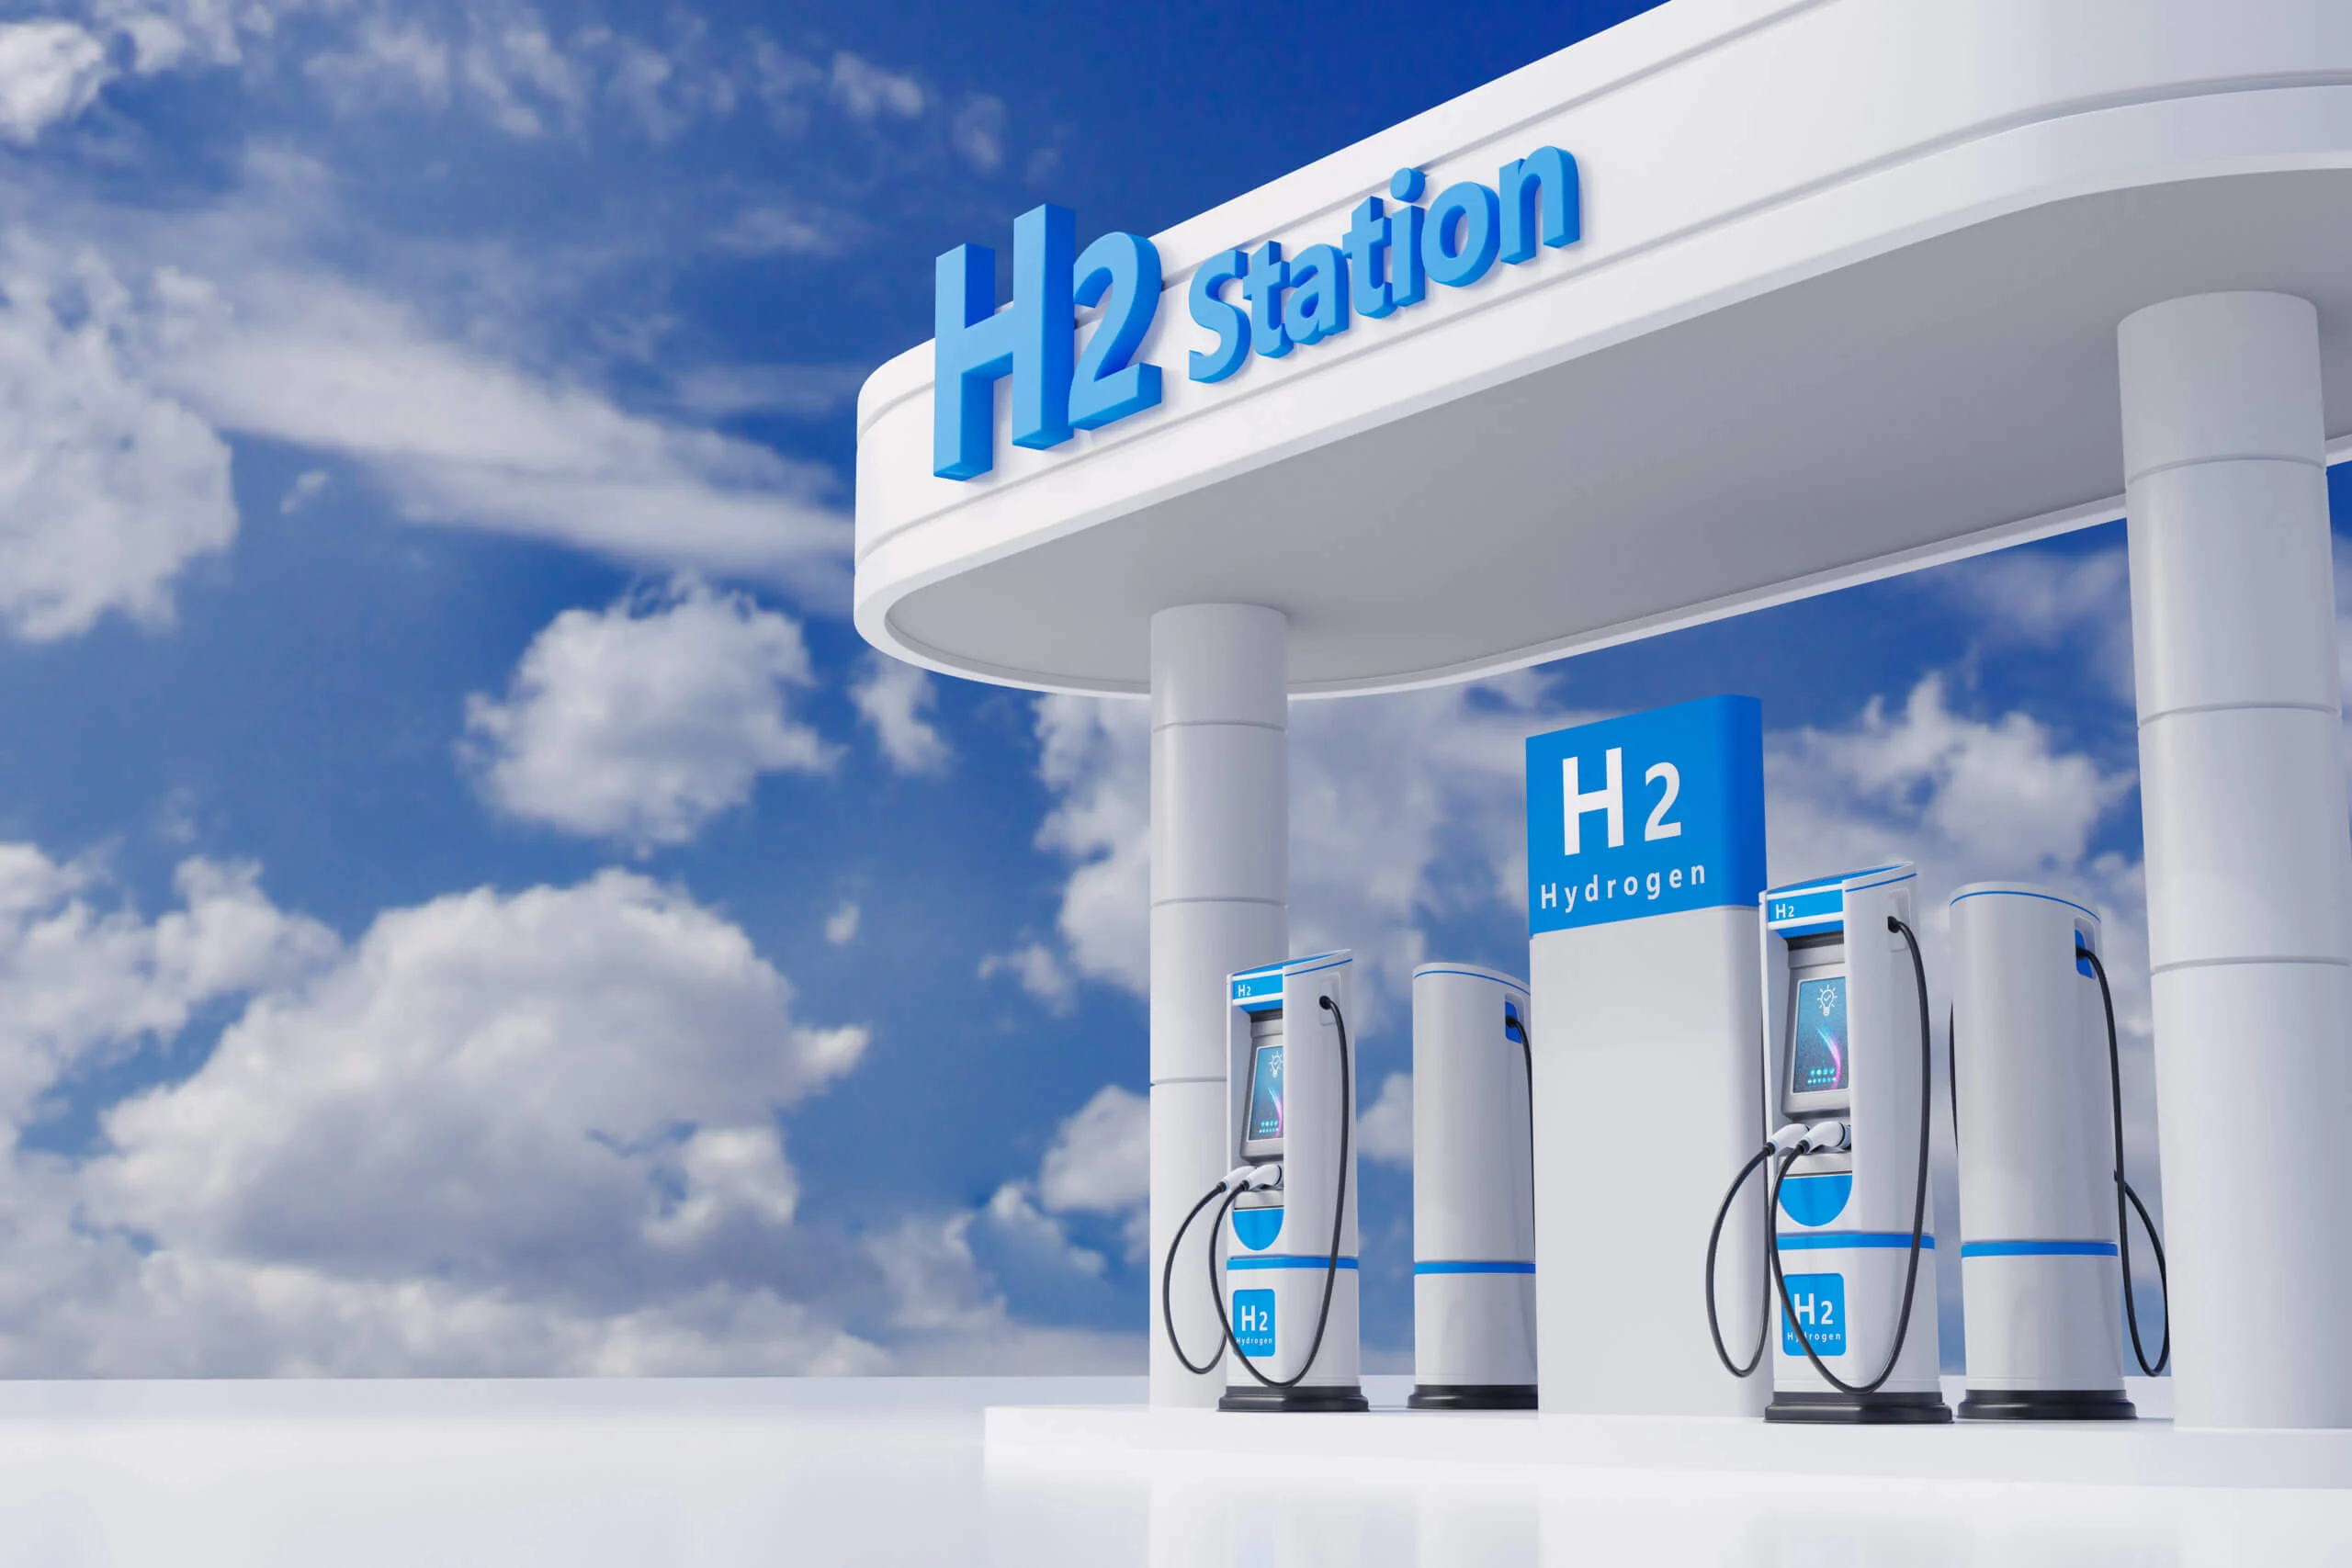 Powertap Enters into an Exclusive Middle East Distribution Agreement  Deploying more than 100 Hydrogen Refuelling Stations - Hydrogen Central